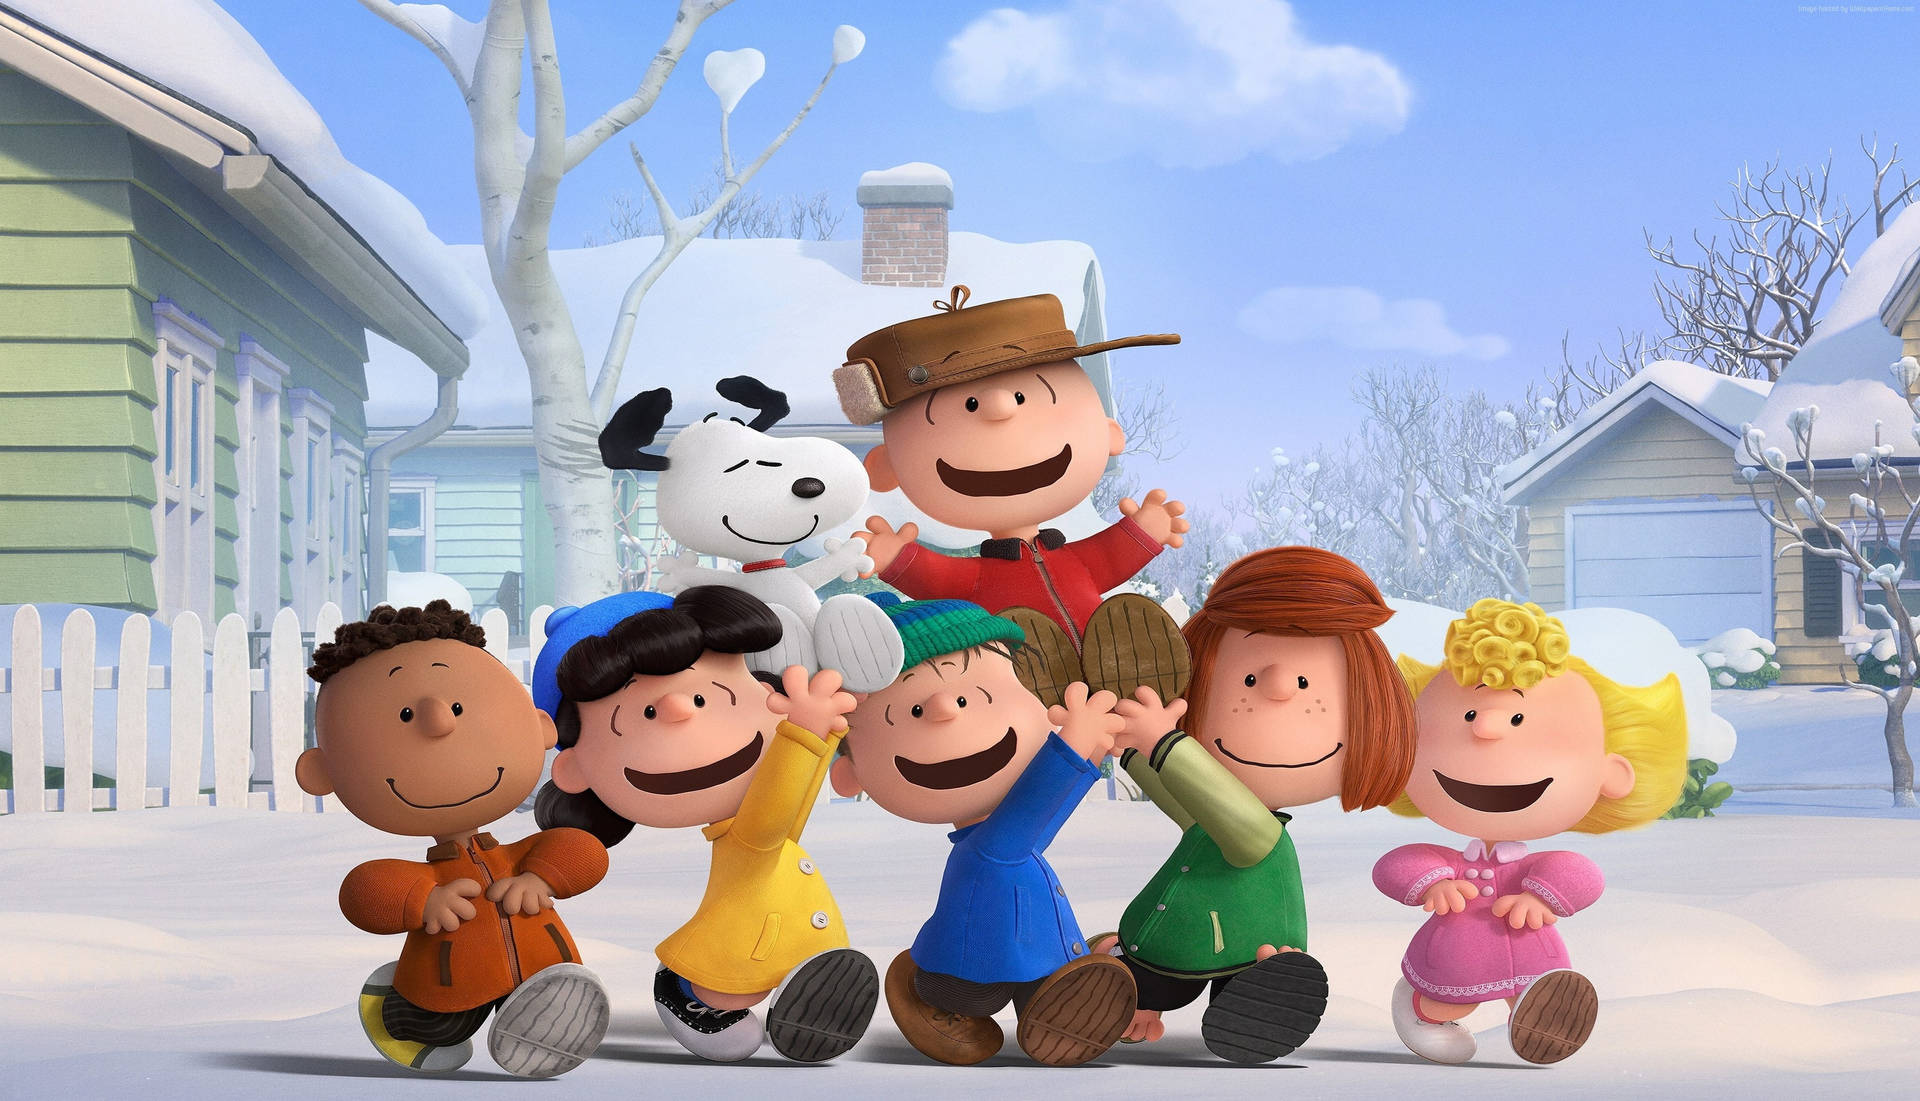 Peanuts Characters In Winter Wallpaper